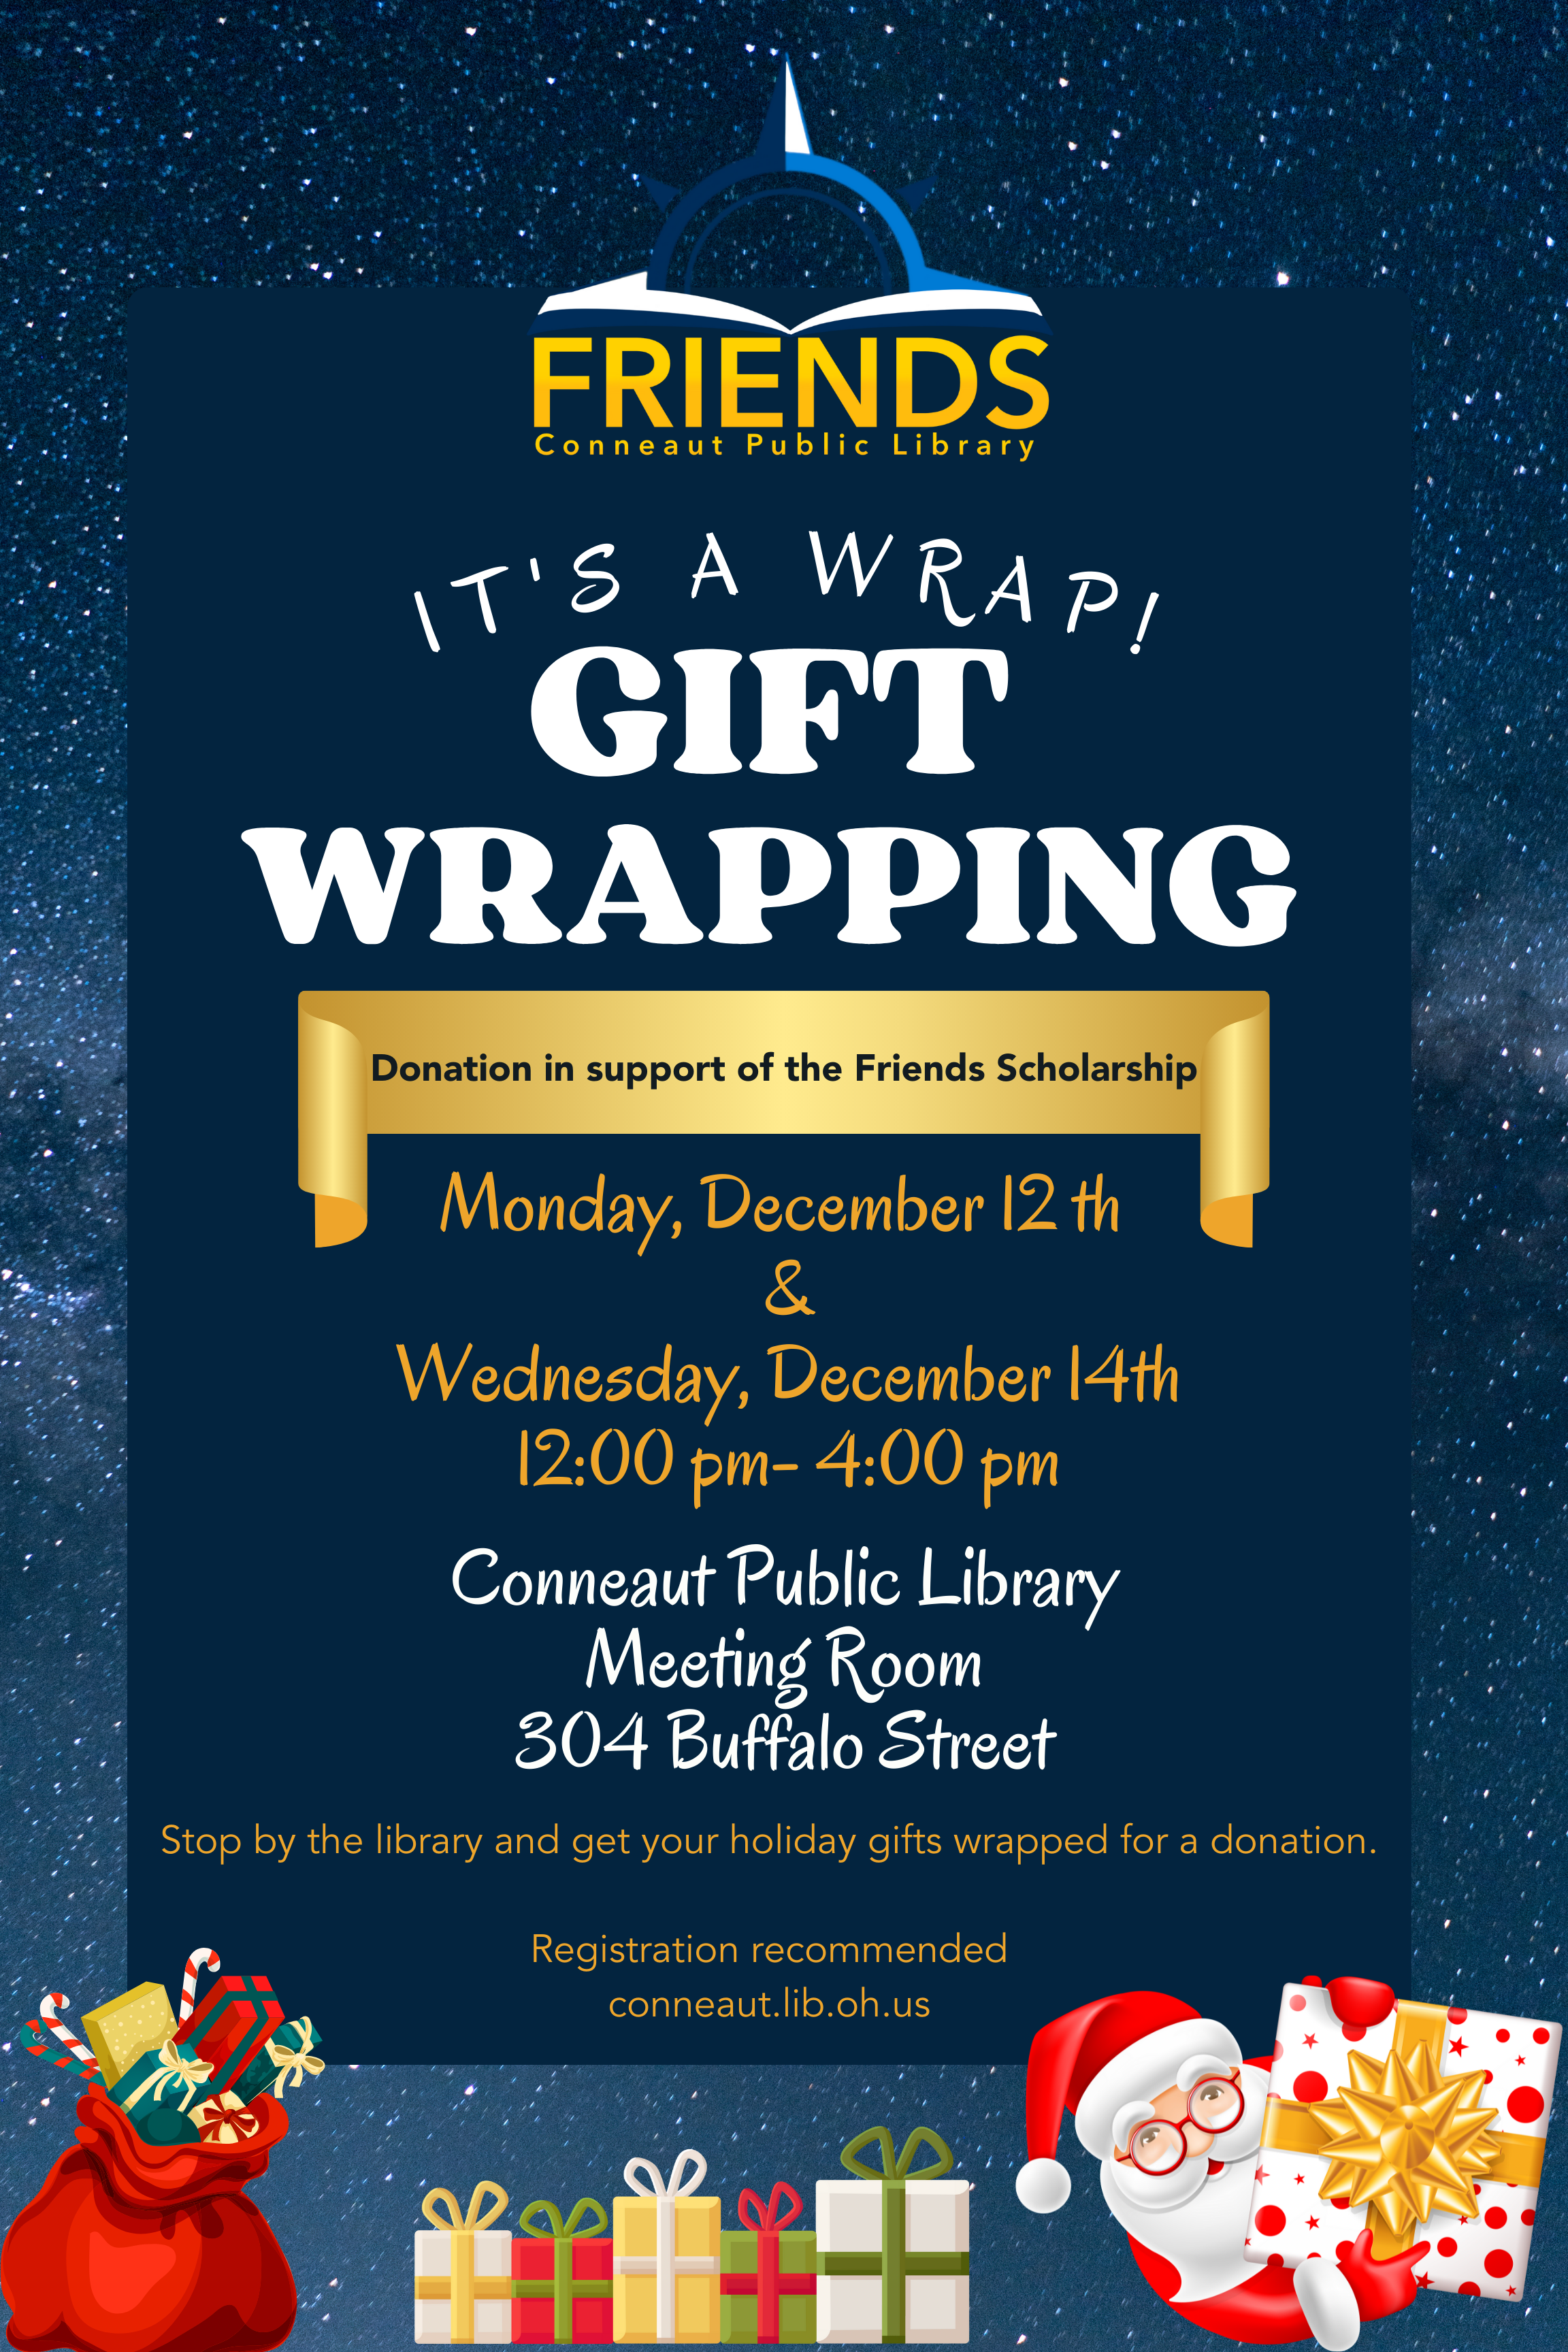 flyer for gift wrapping event